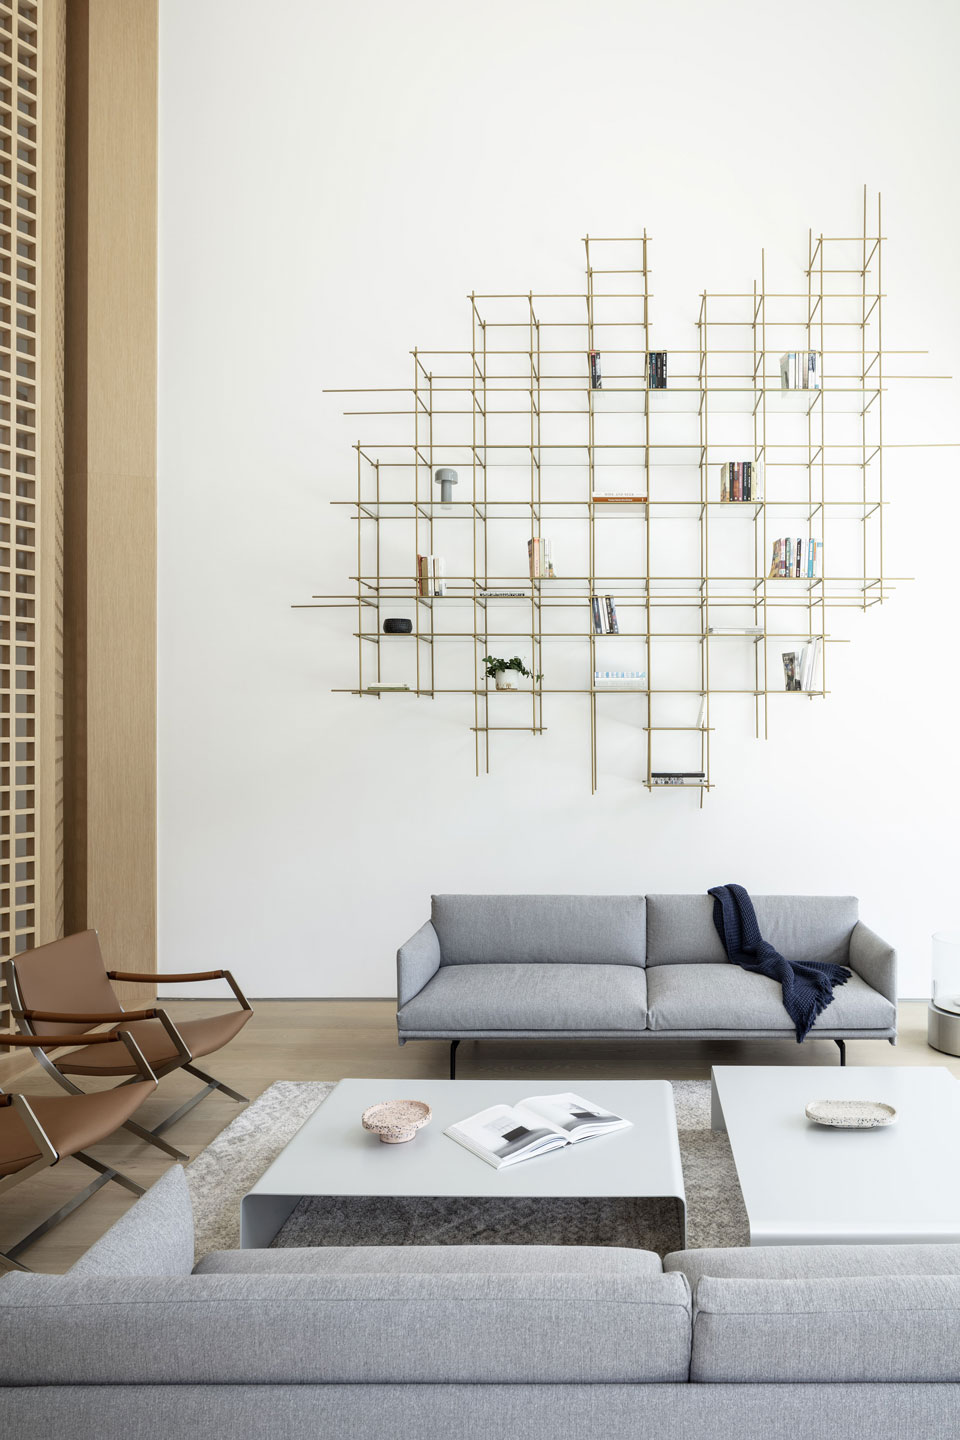 Vibia The Edit - Tel Aviv Designer Selects Structural for a Contemporary Residence